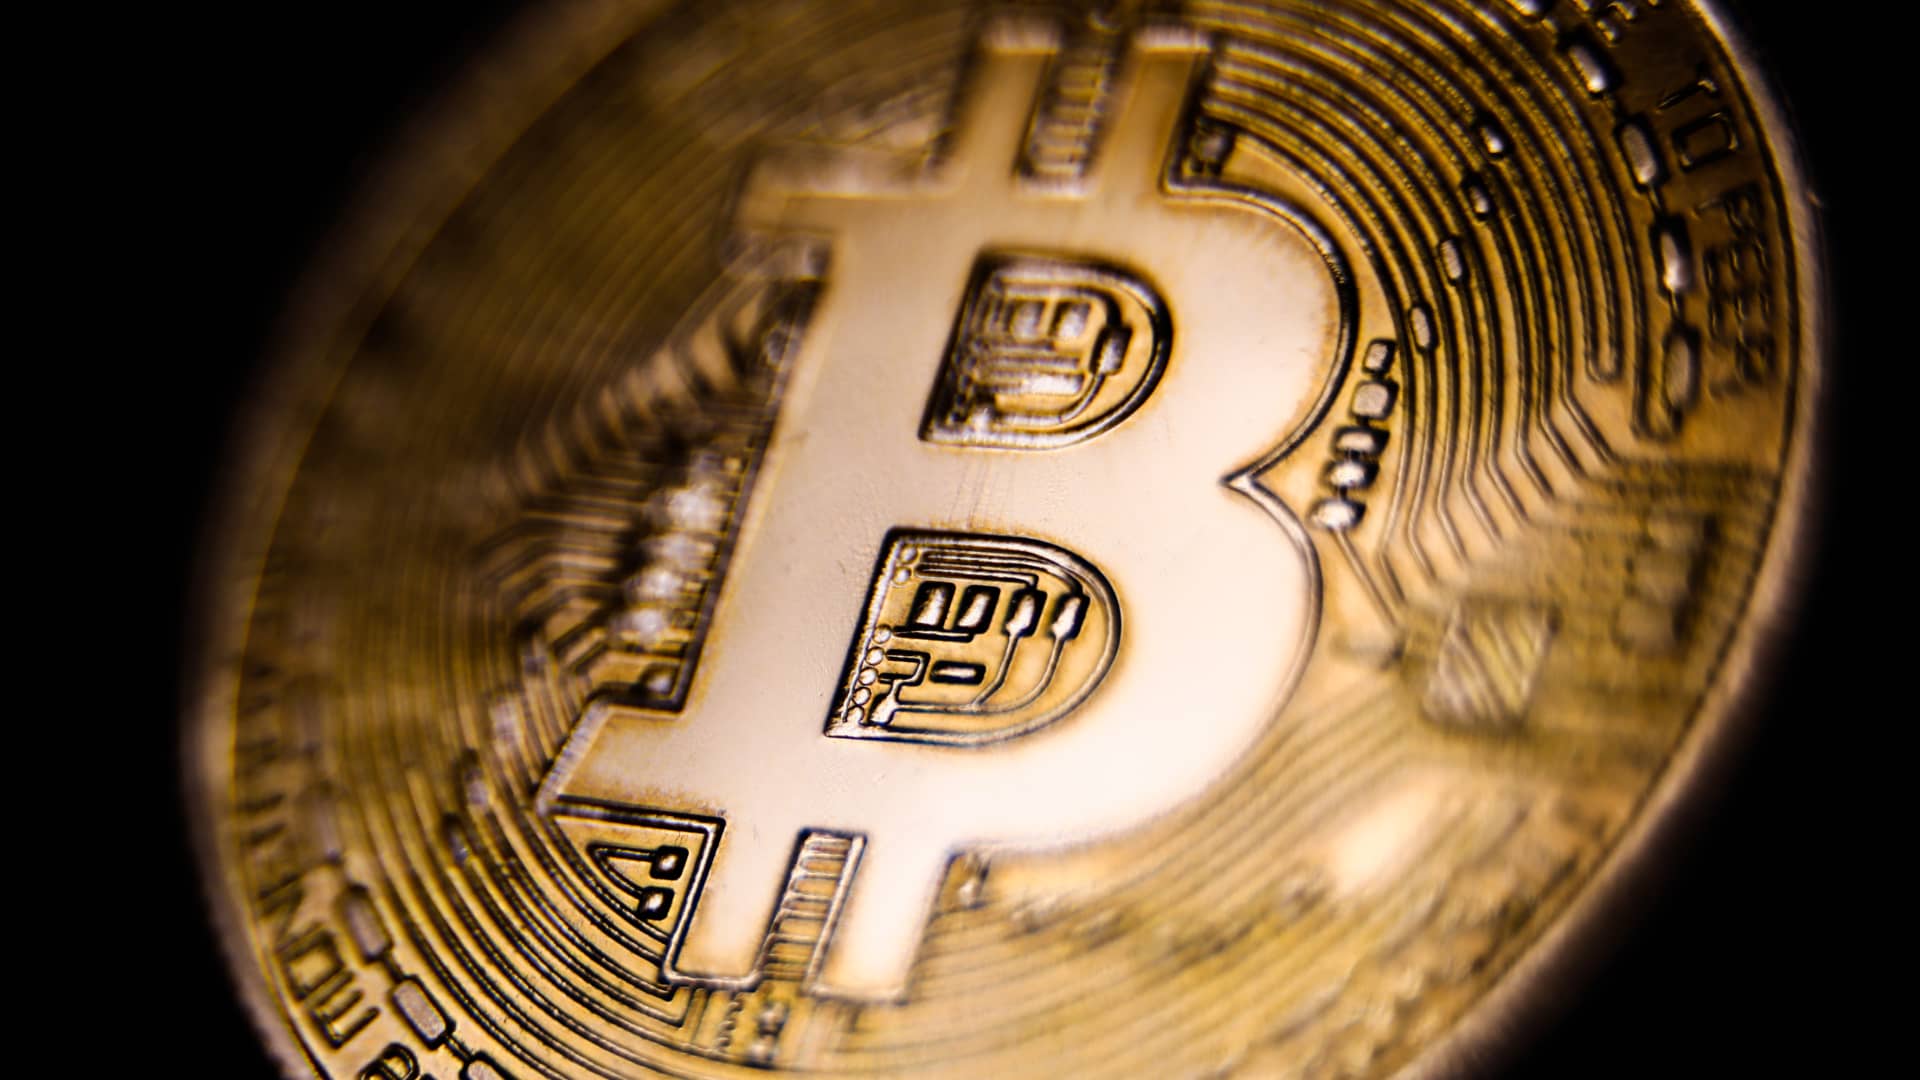 Bitcoin drops to hit lowest level since January after stock sell-off